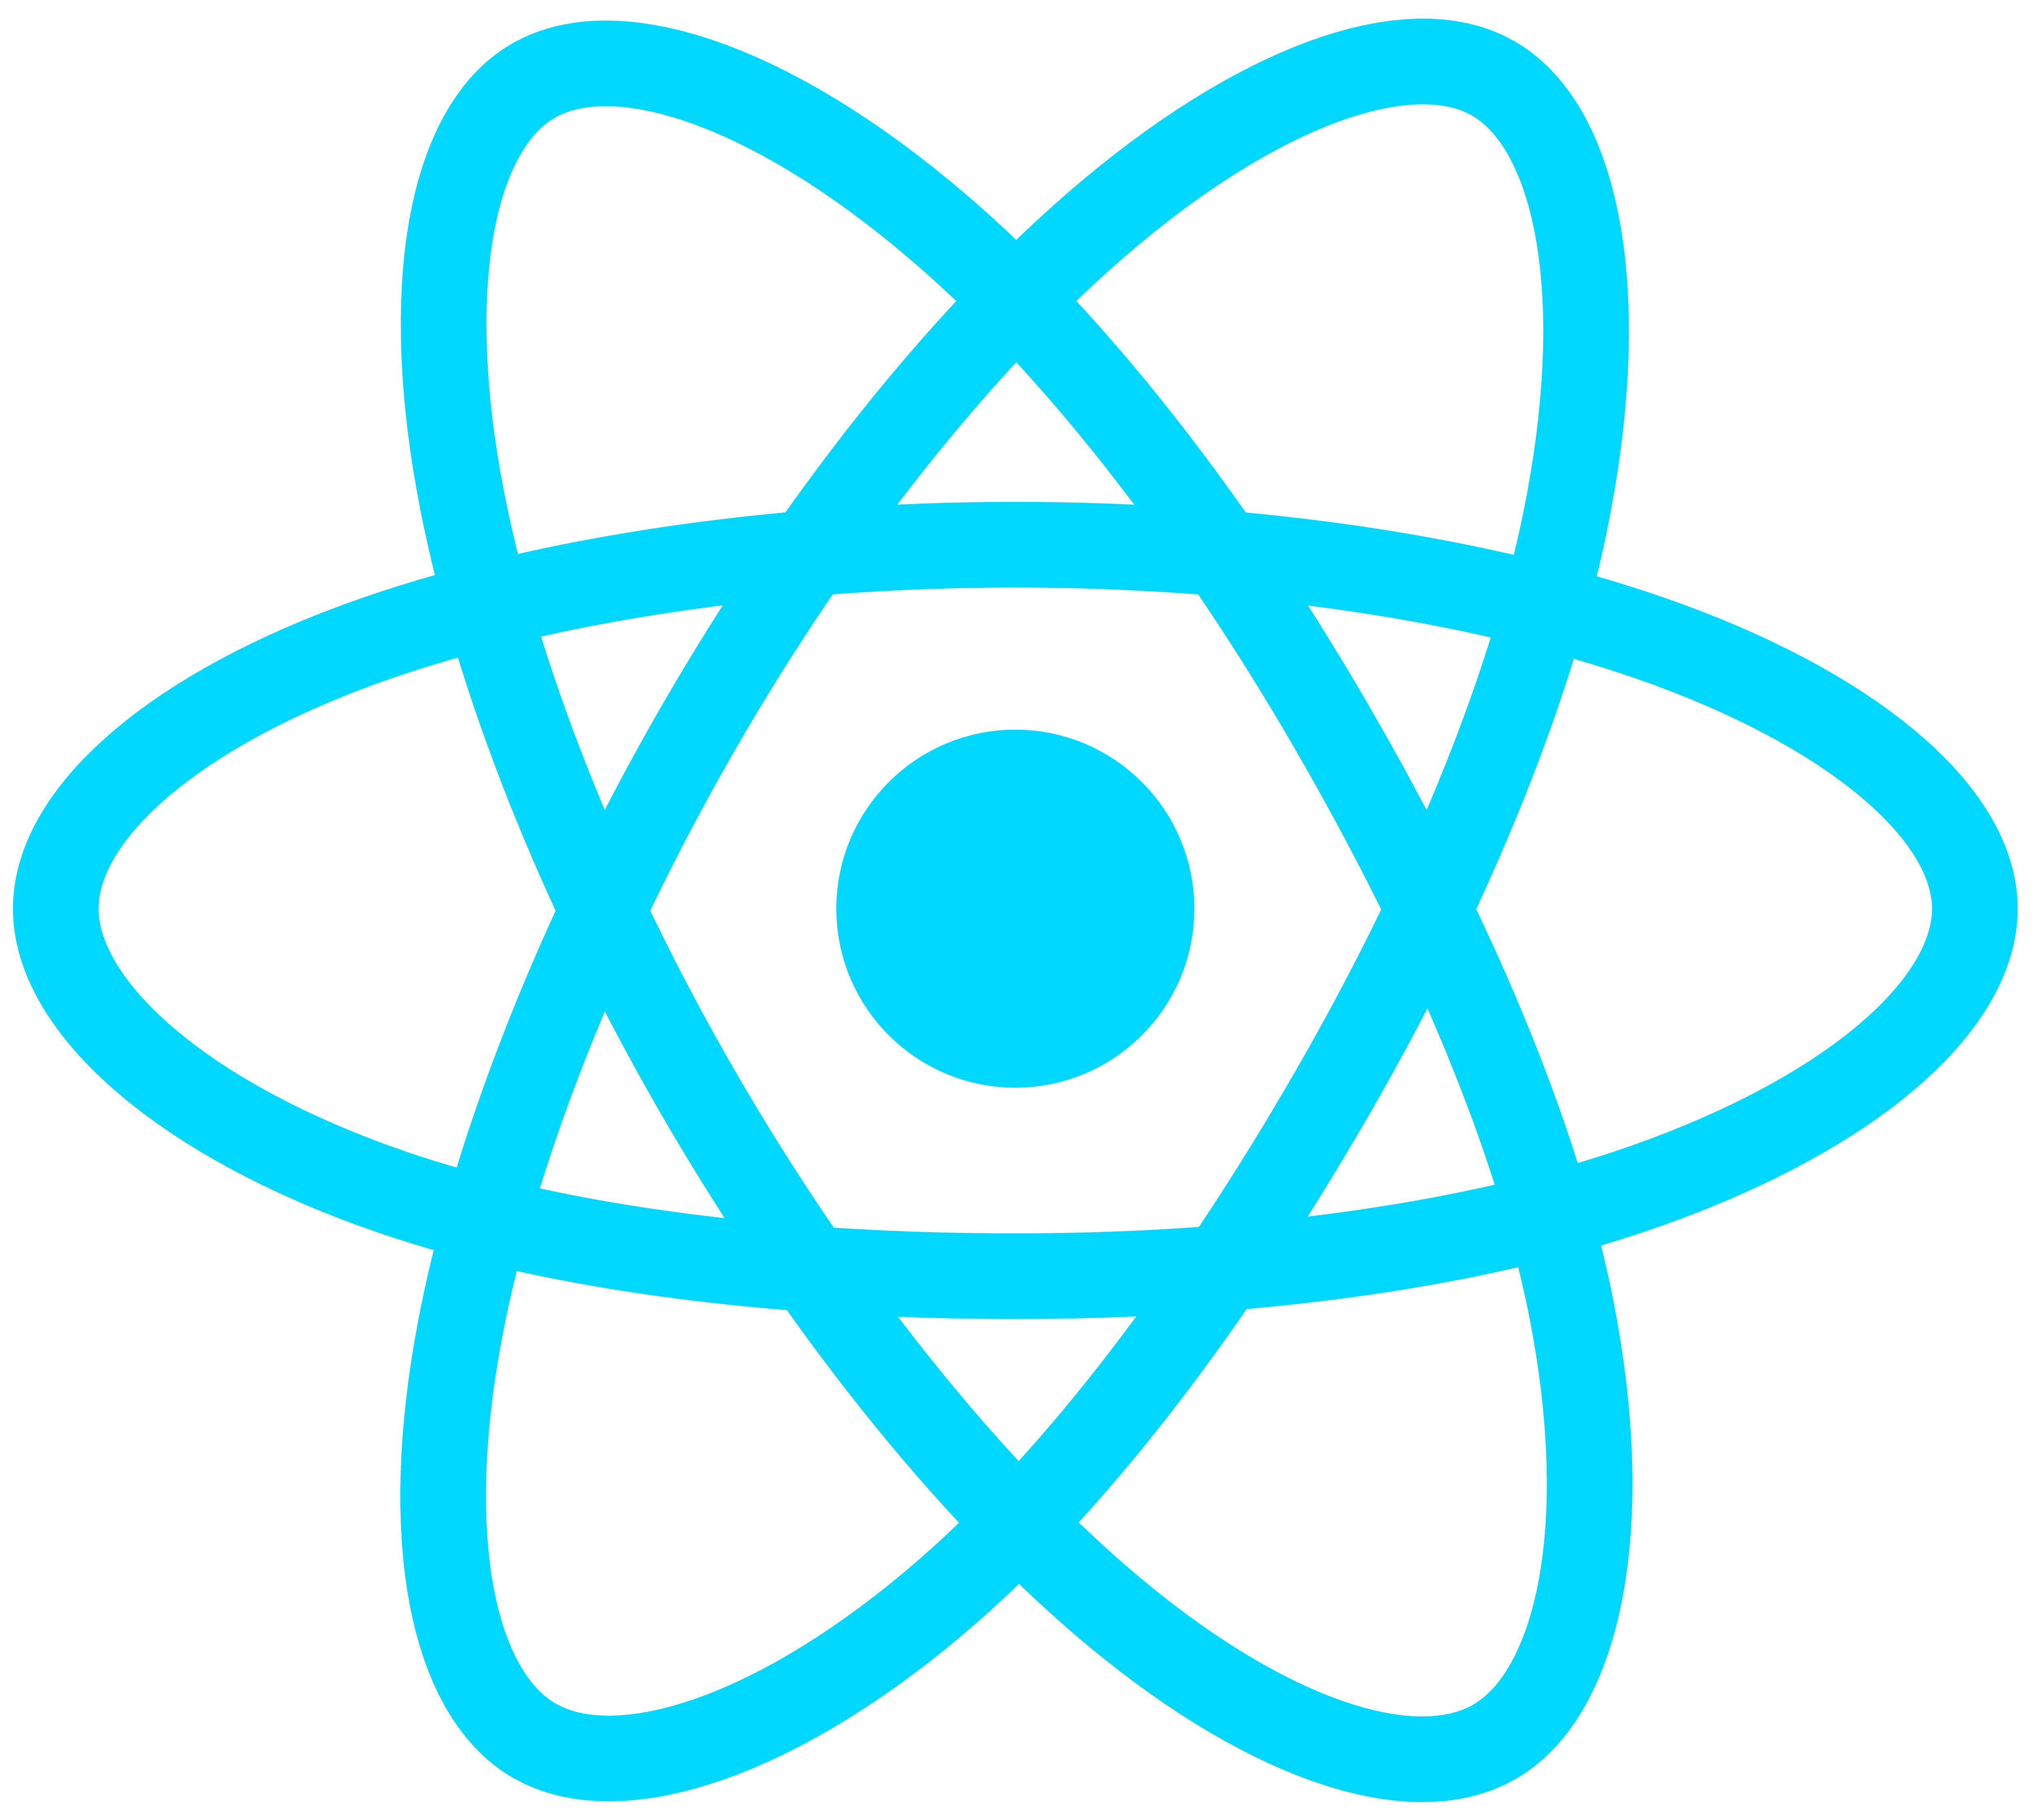 Technical Introduction to React | Benjie Gillam